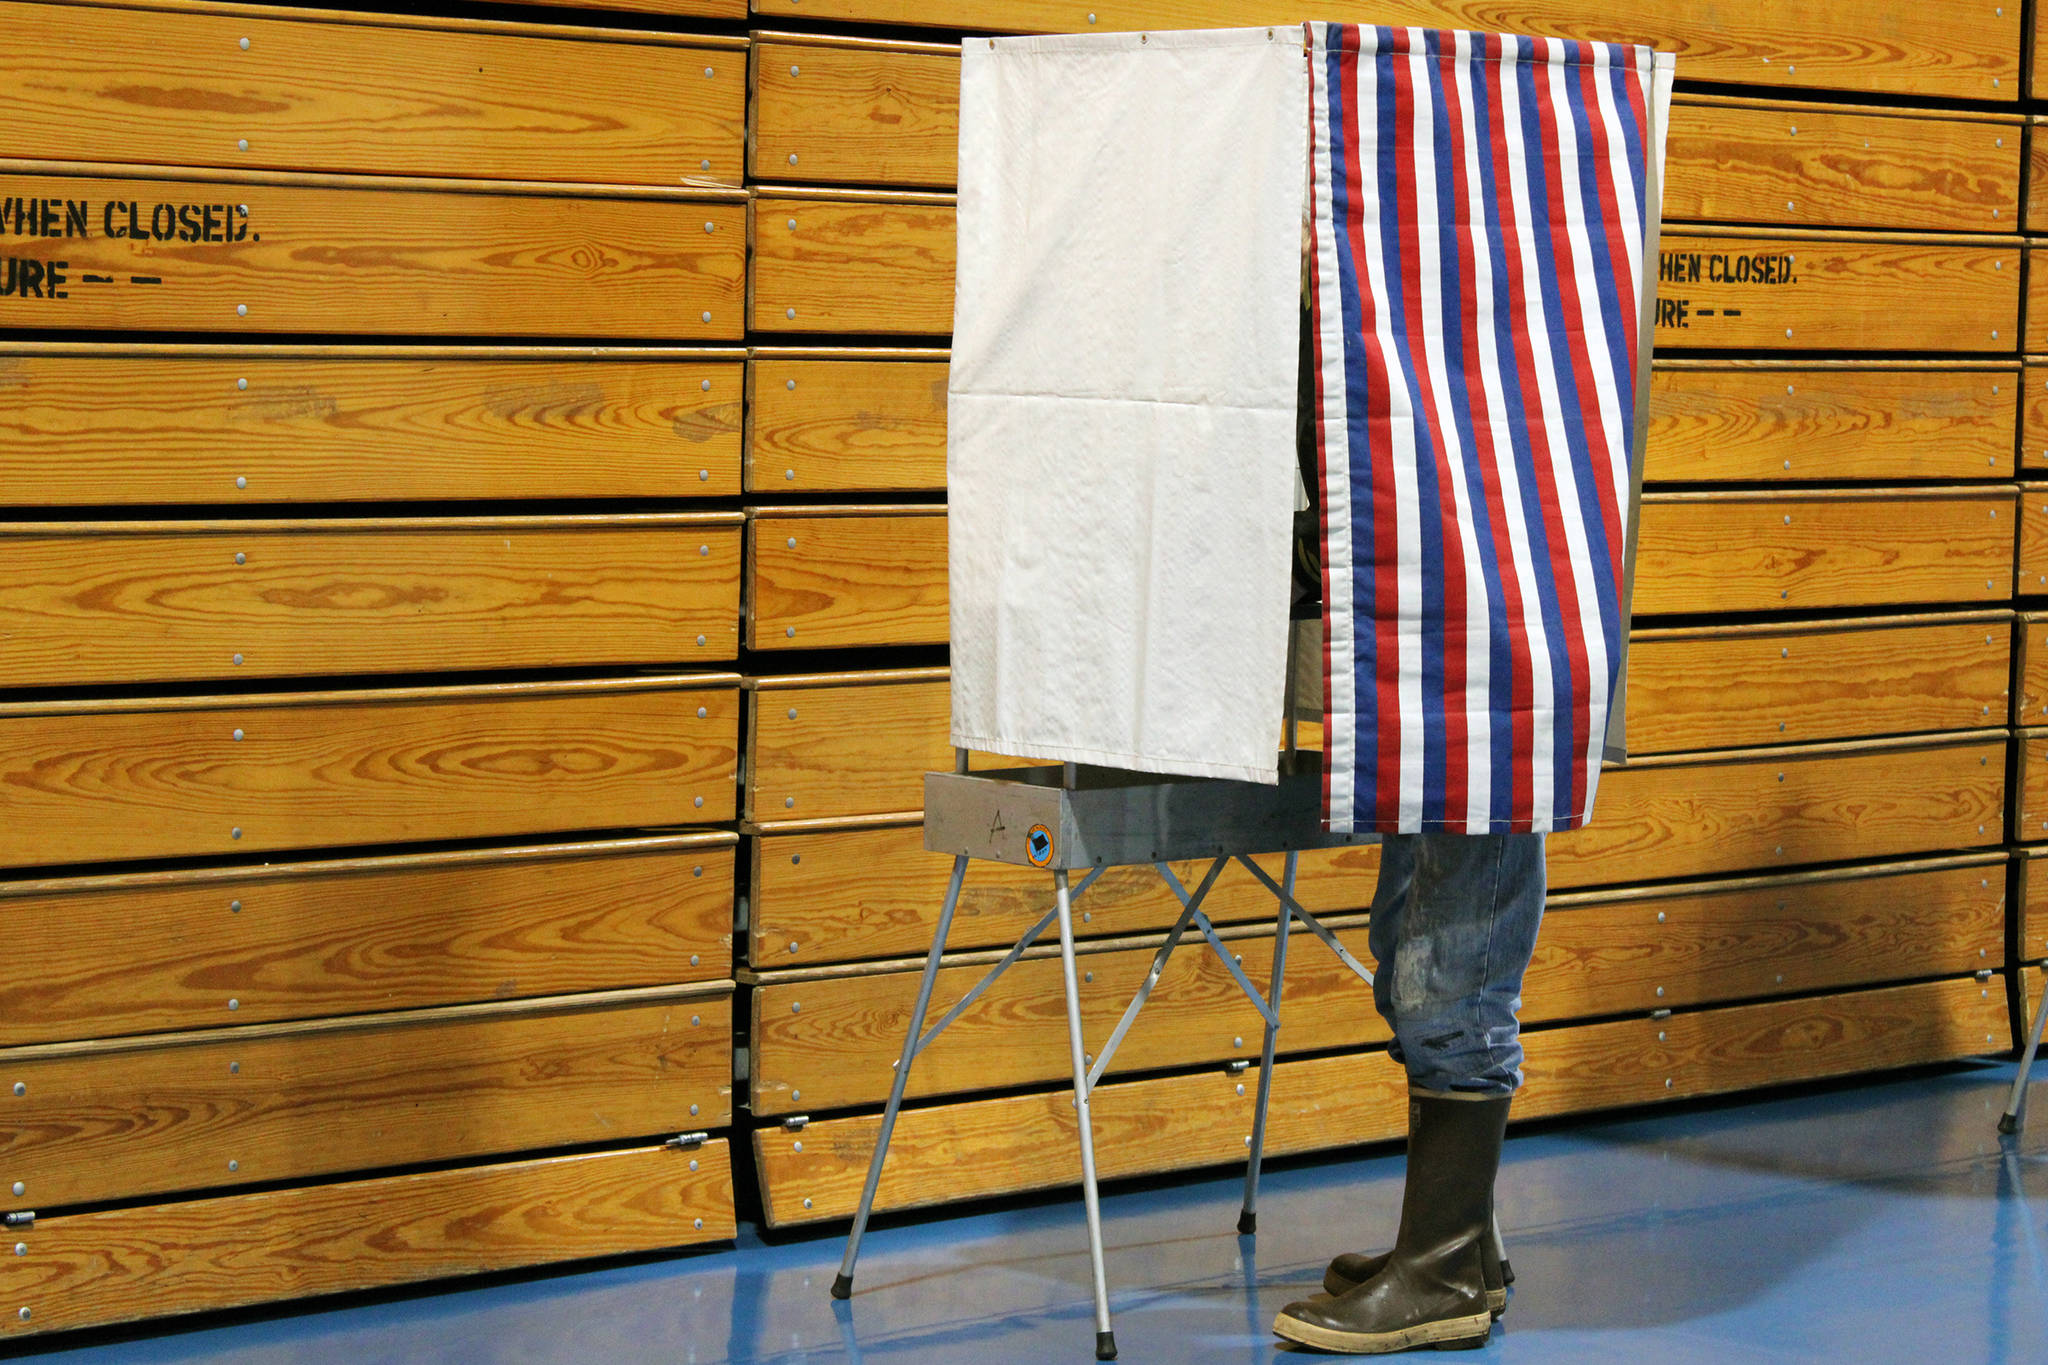 Election officials say it was a slow day at the polls